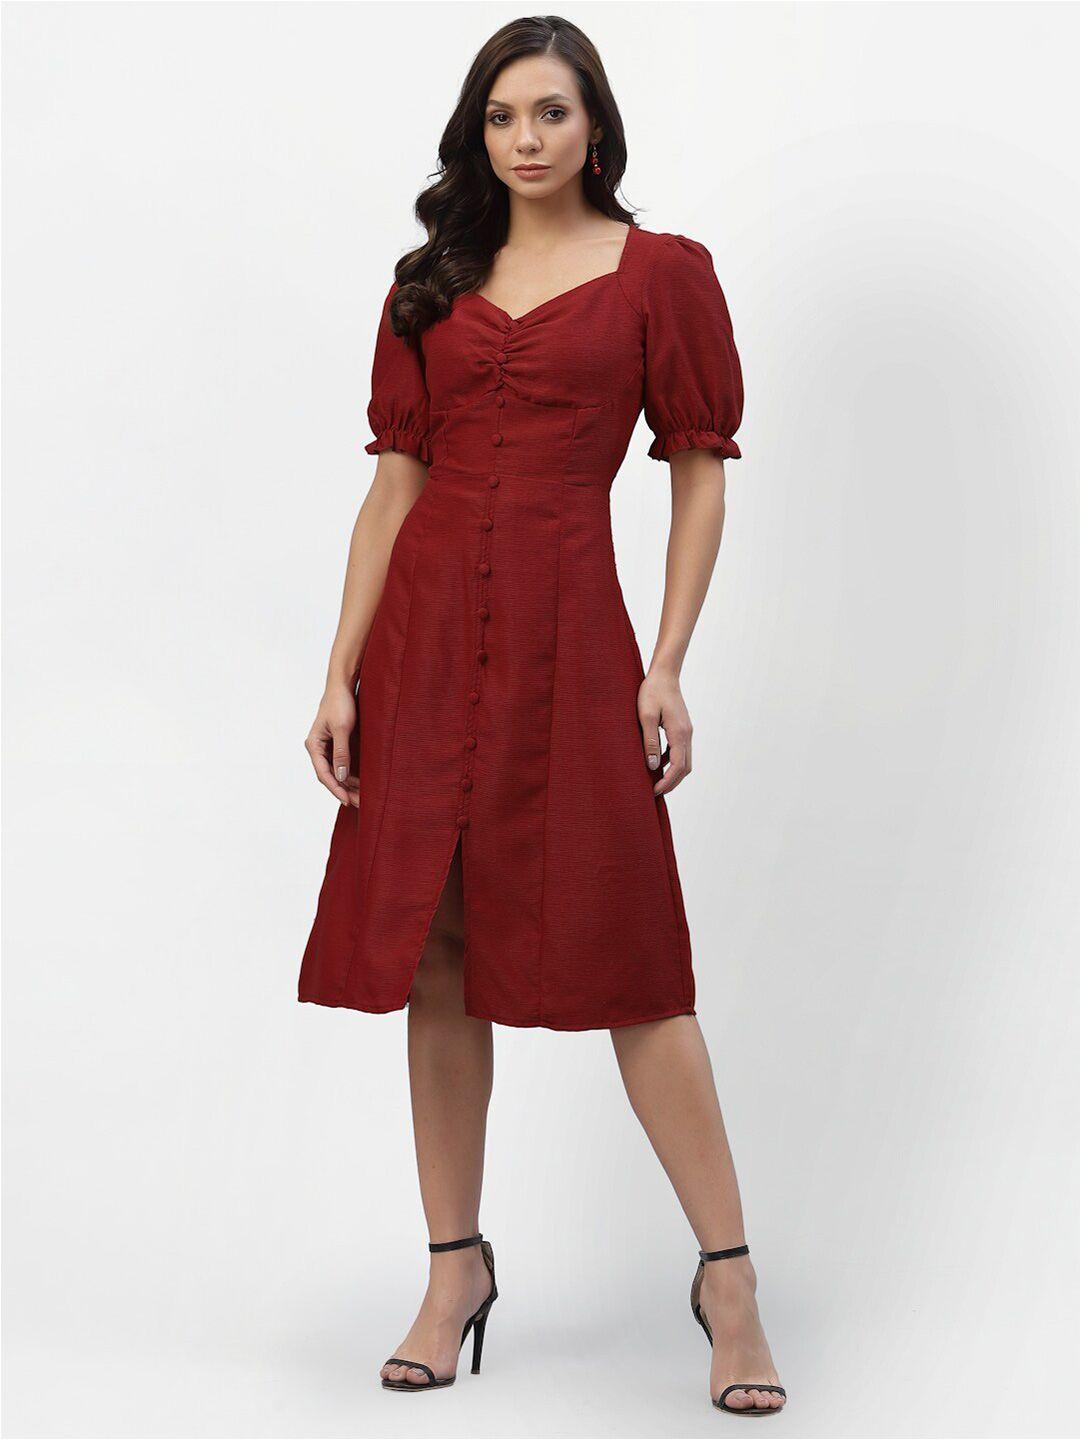 aayu women red crepe a-line dress